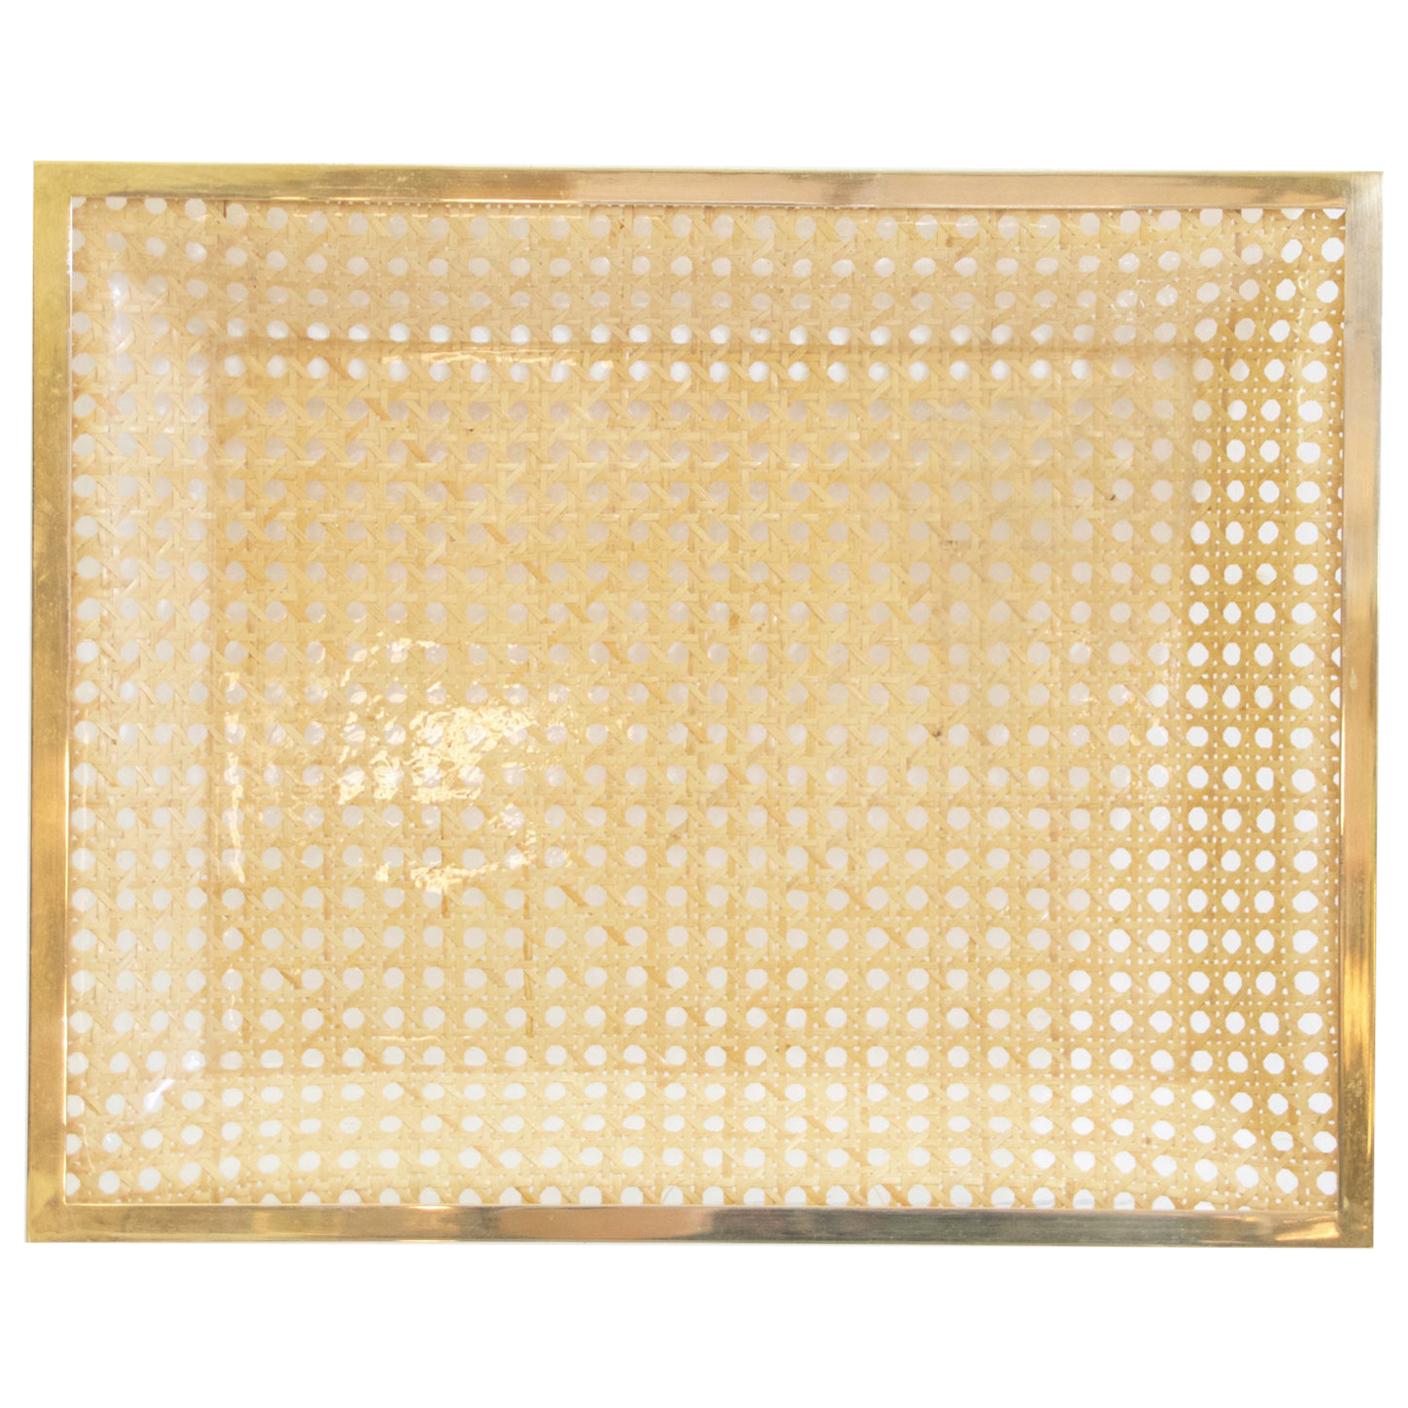 Vintage Lucite and Rattan Square Tray, 1970s